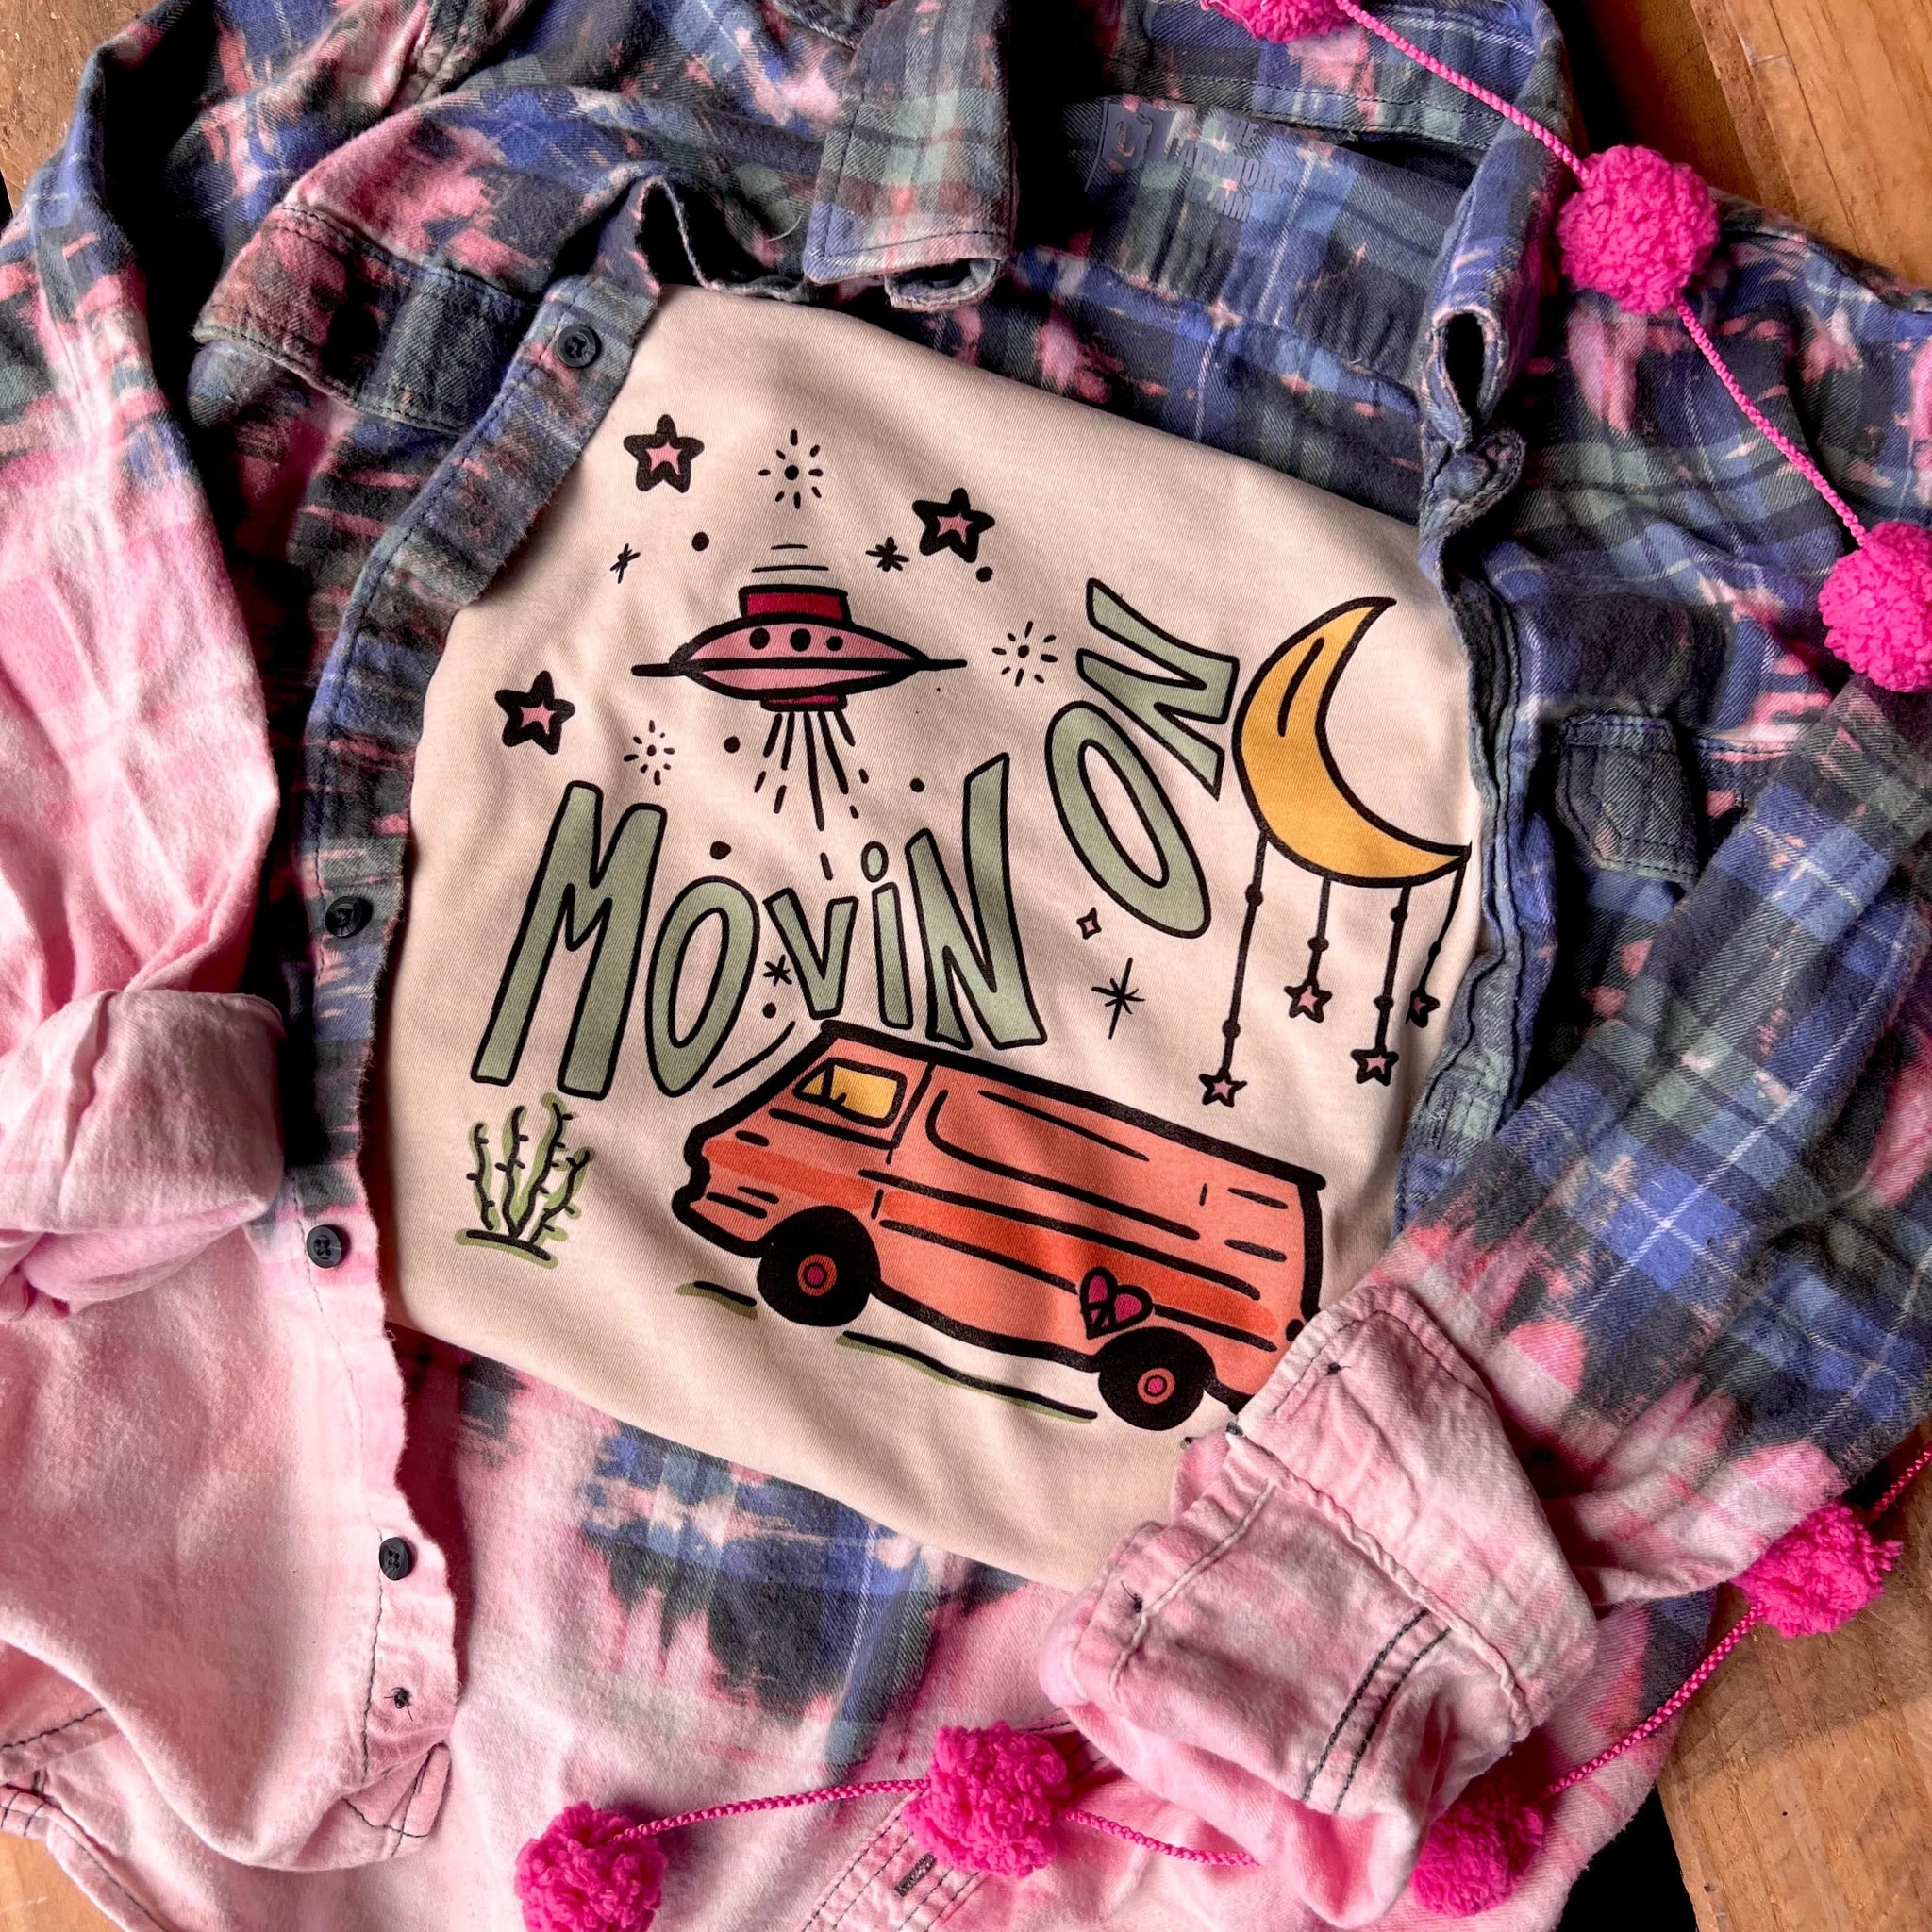 This cream graphic tee includes a crew neckline, short sleeves, and cute hand drawn design of a spaceship, camper van, moon with stars hanging from it, and the words "MOVIN ON" in a light turquoise between the spaceship and van. This tee is shown in this photo as a folded flat lay on top of a bleached button up plaid top. 